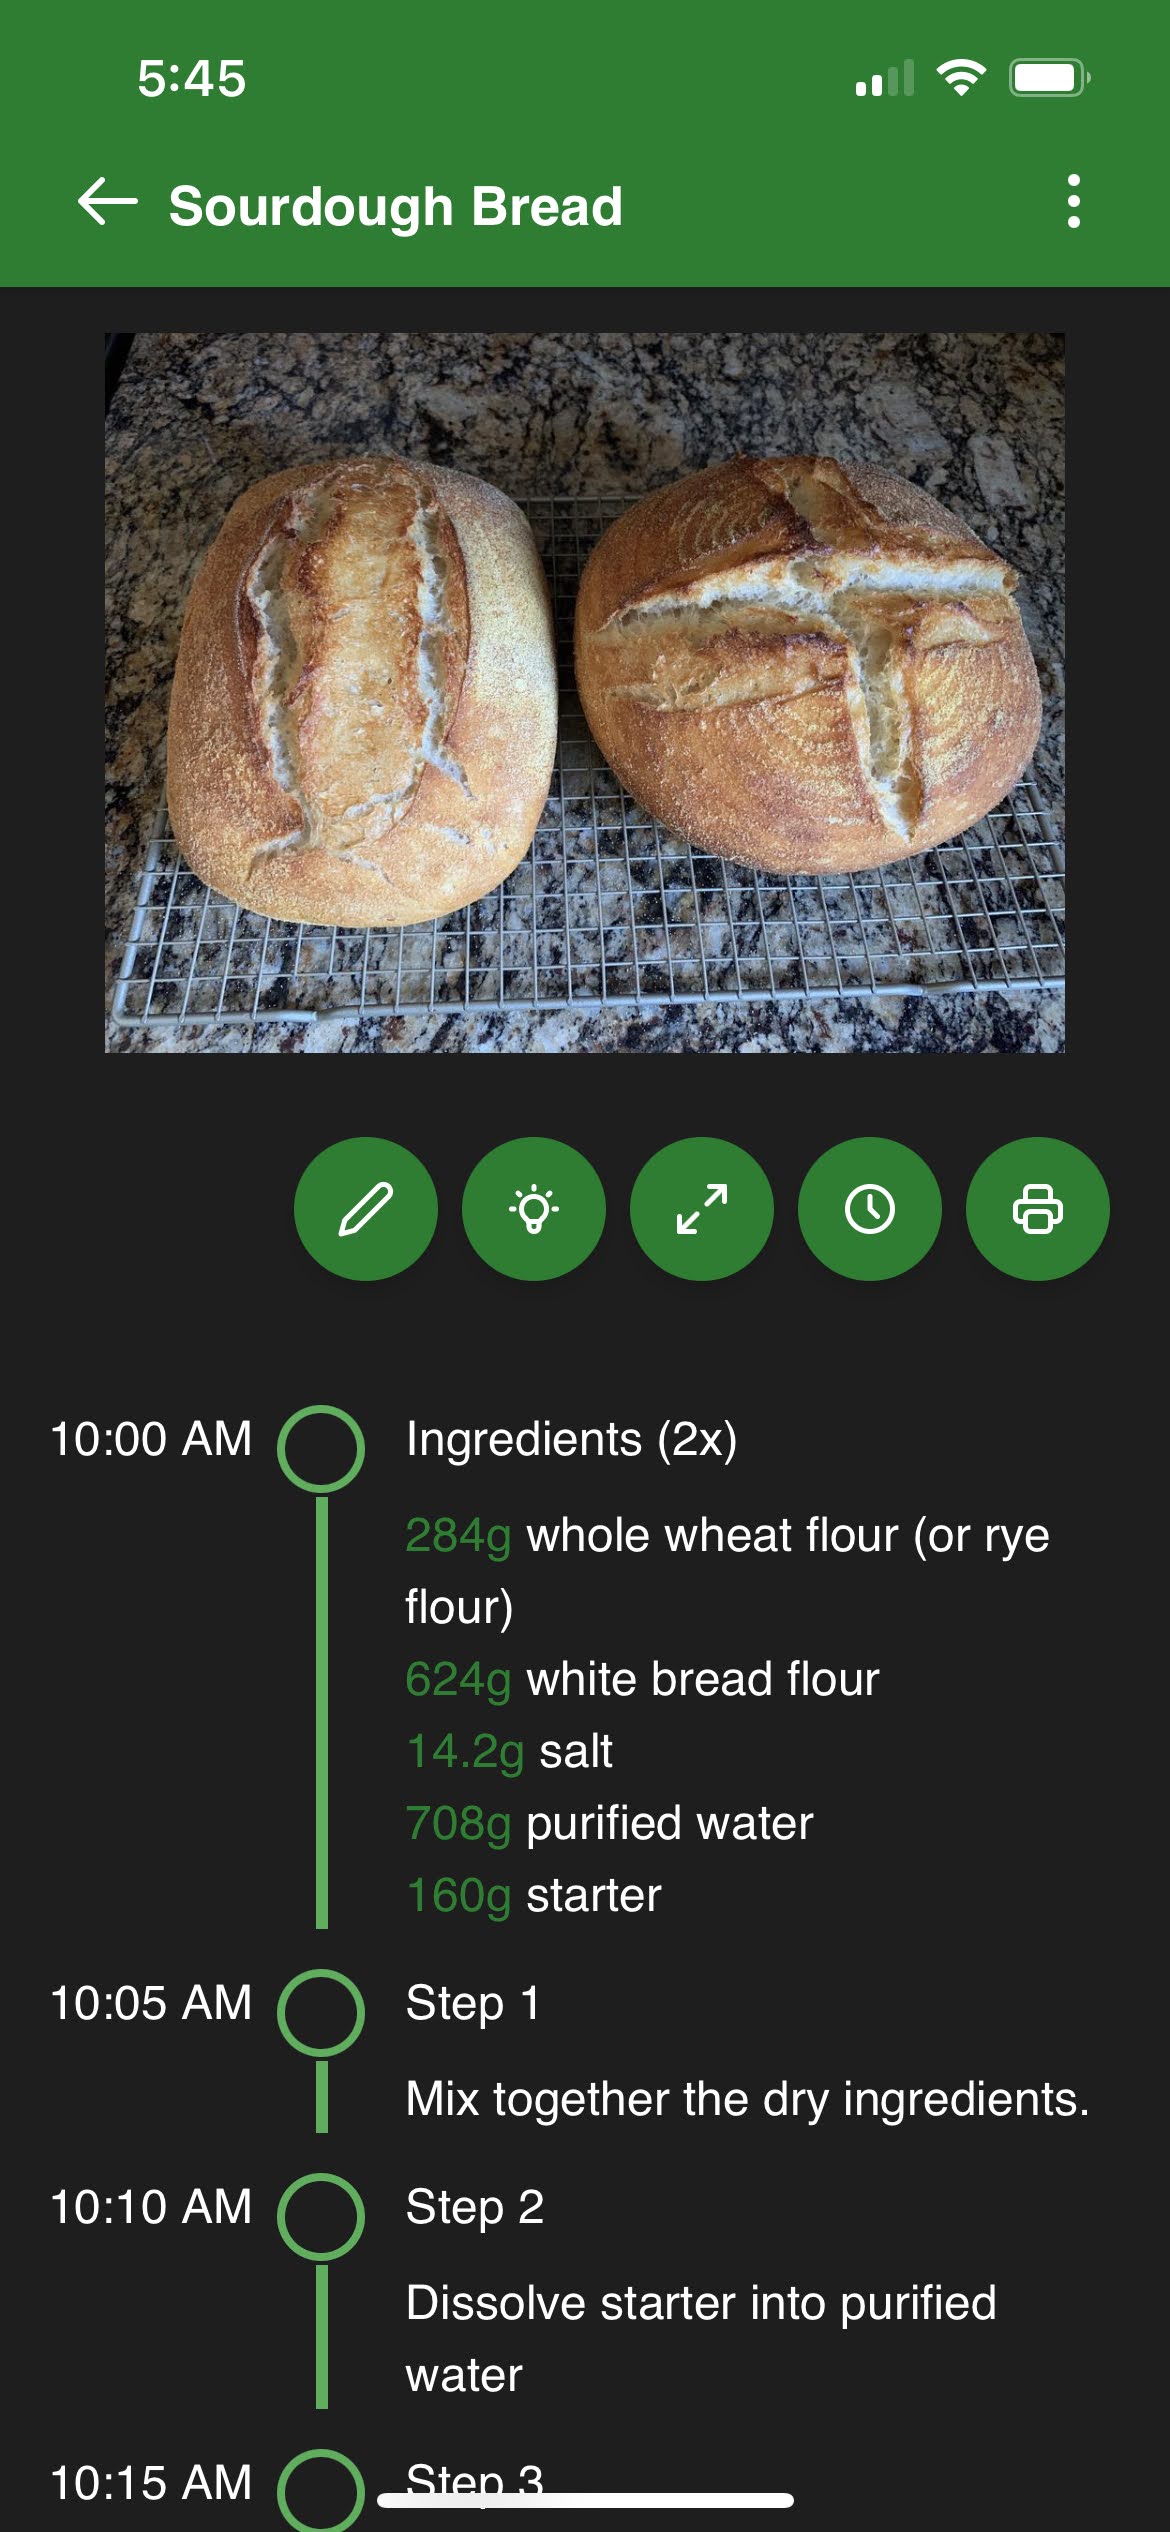 iOS recipe display after new start time selection